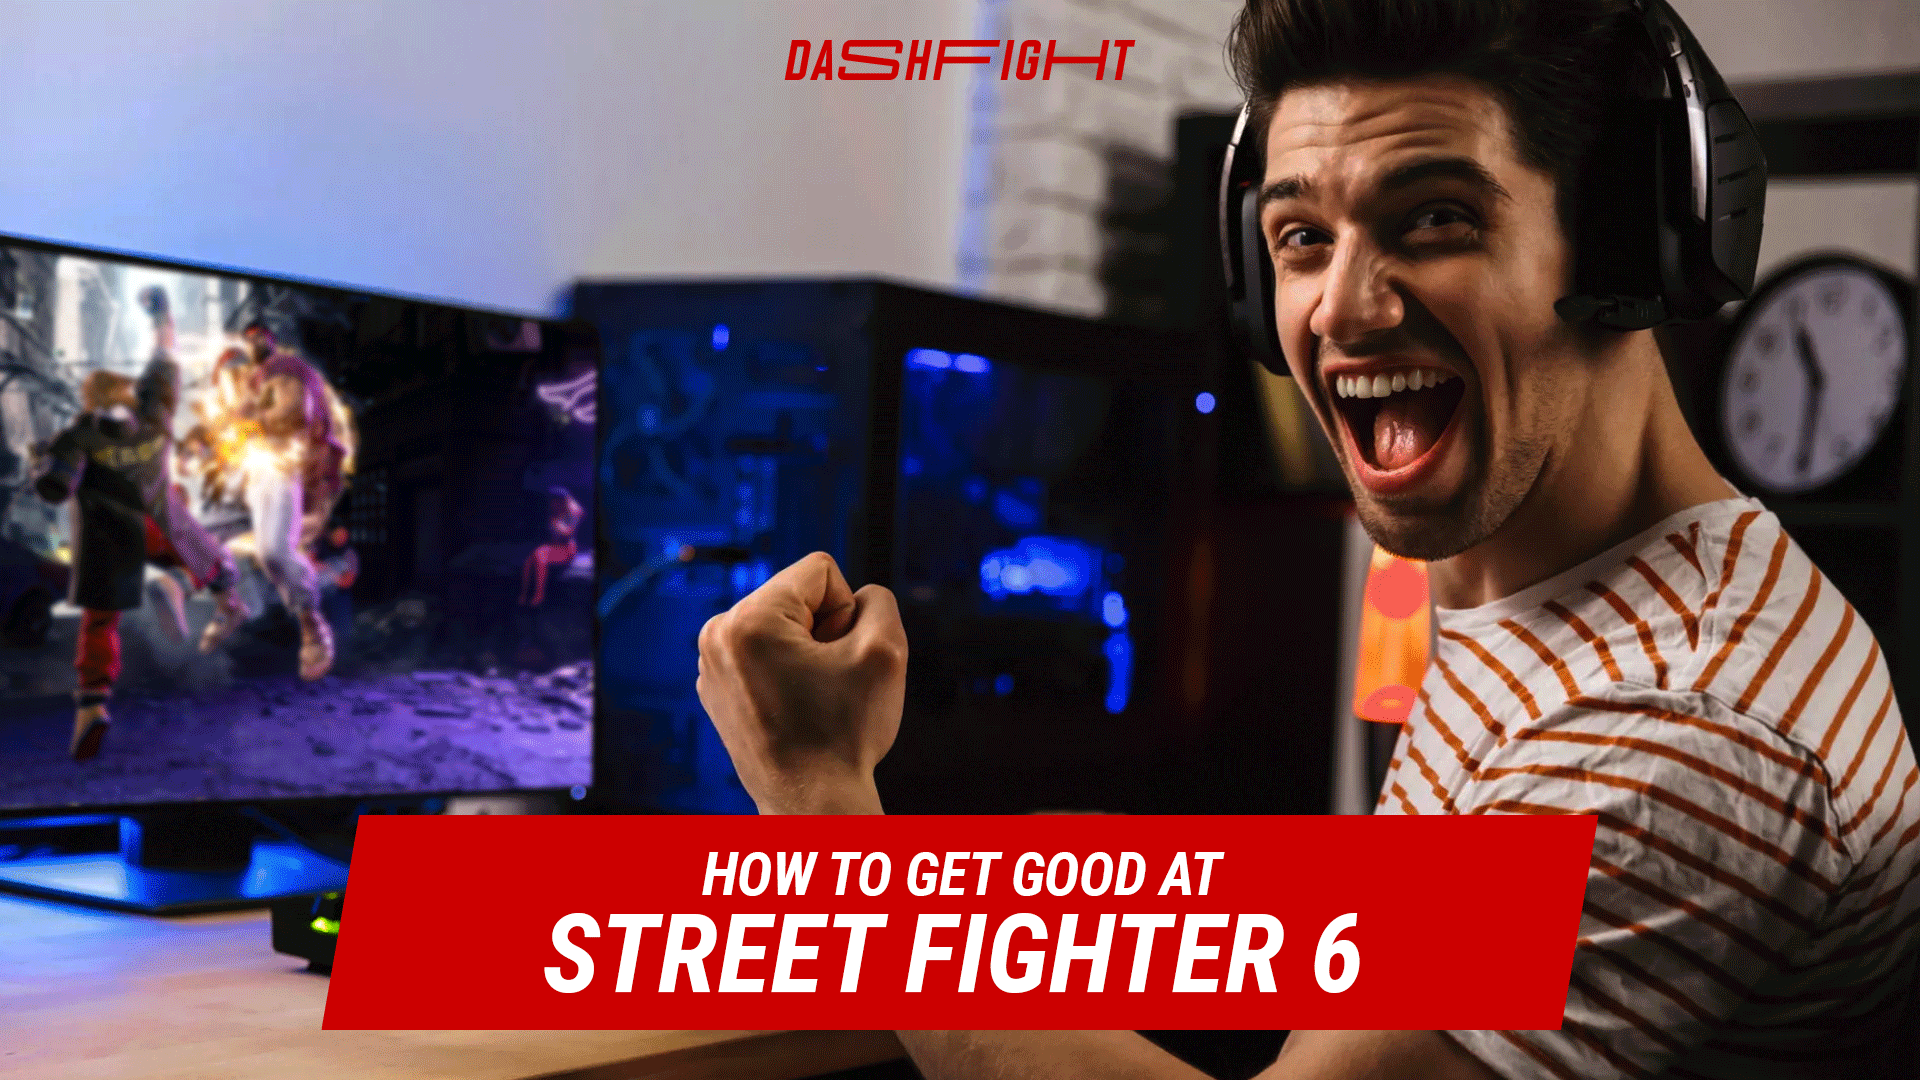 Street Fighter 6 is out. How to get good at it?